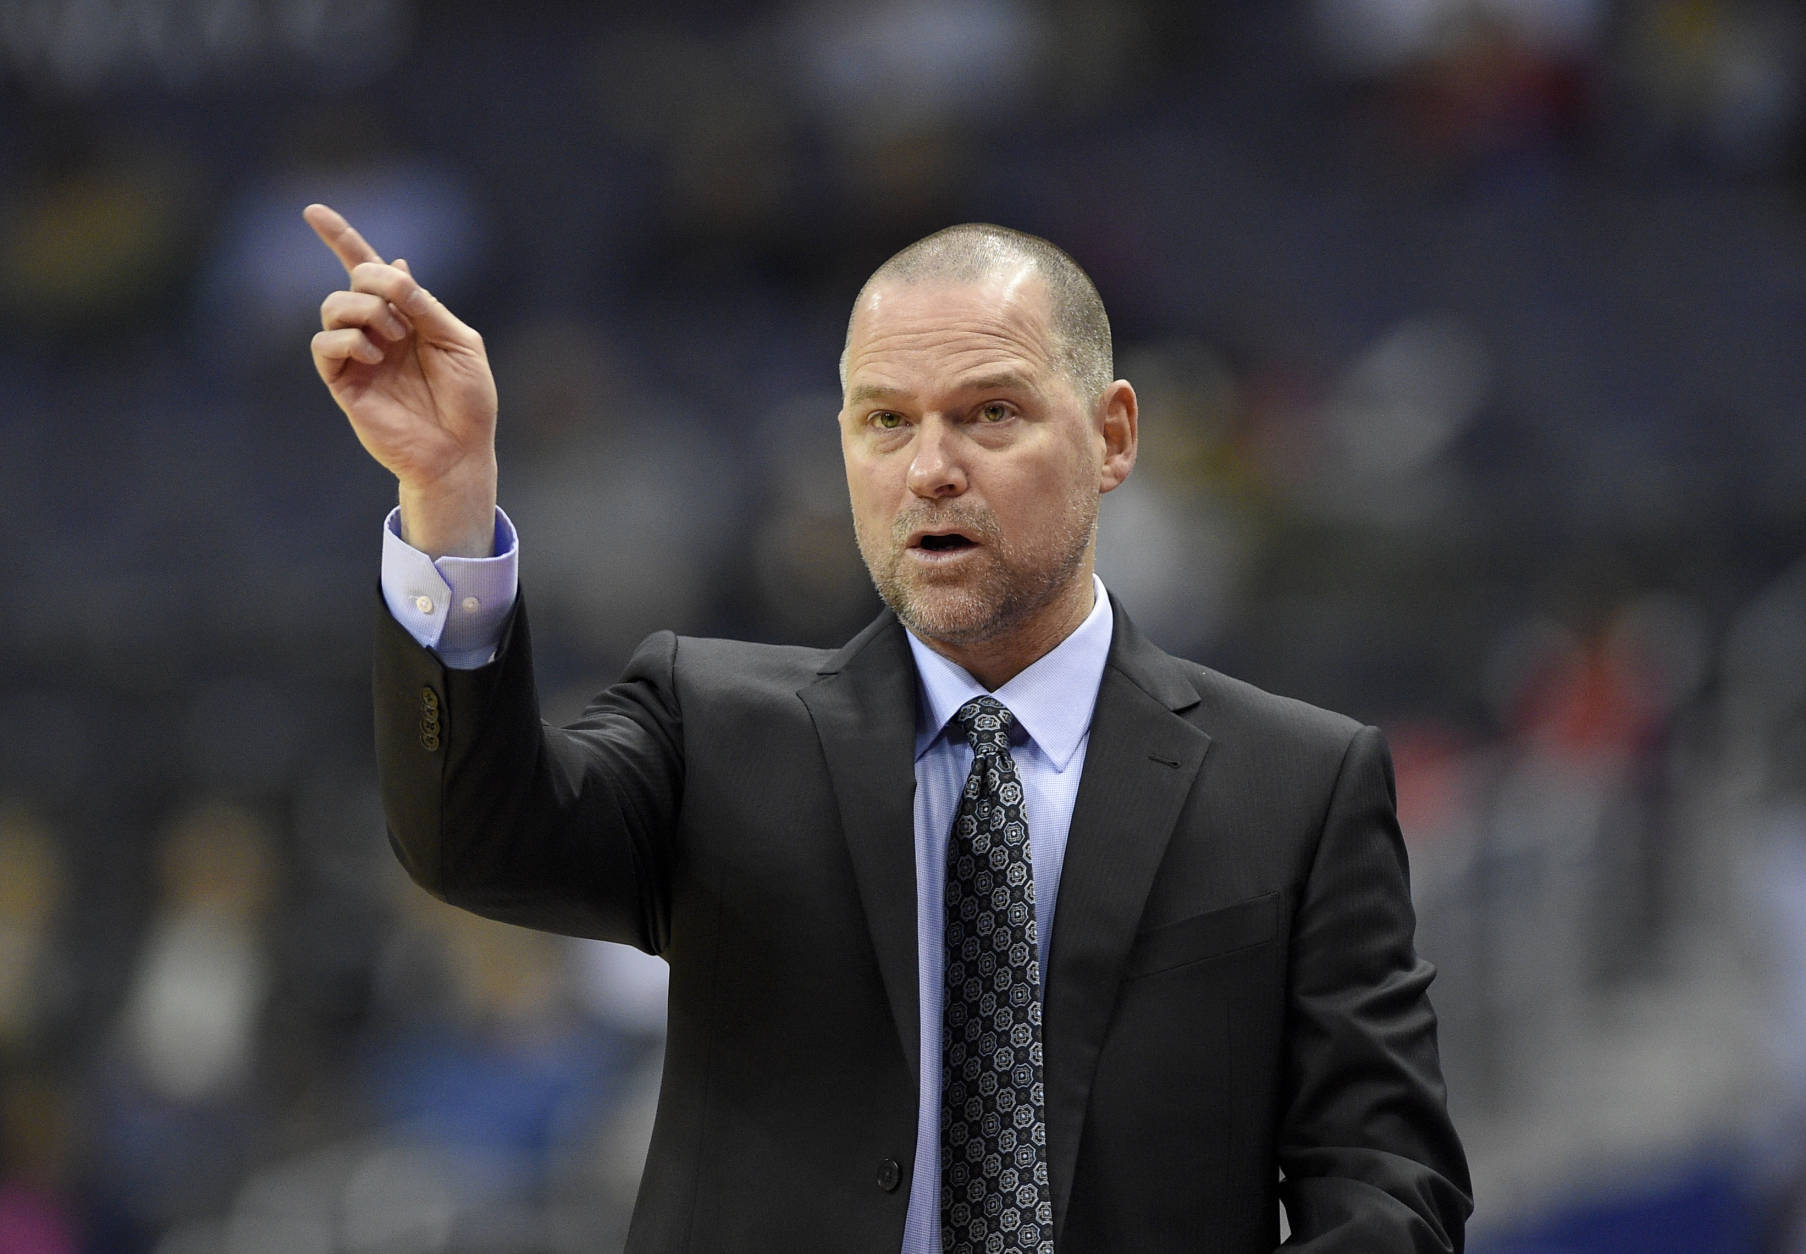 Denver Nuggets head coach Michael Malone gestures during the first half of an NBA basketball game against the Washington Wizards, Thursday, Dec. 8, 2016, in Washington. (AP Photo/Nick Wass)